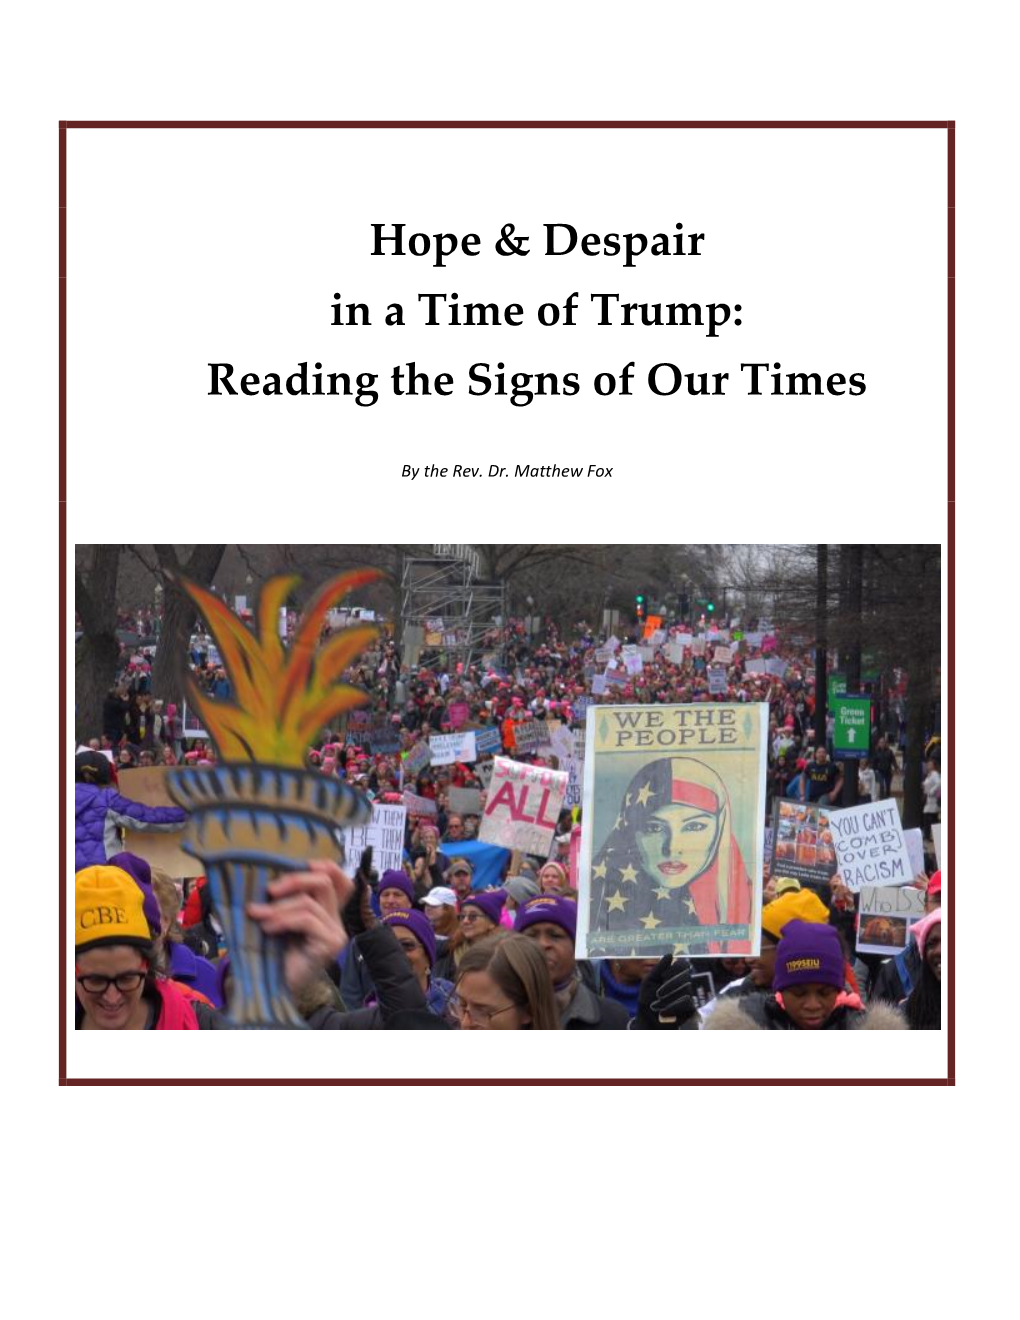 Hope & Despair in a Time of Trump: Reading The